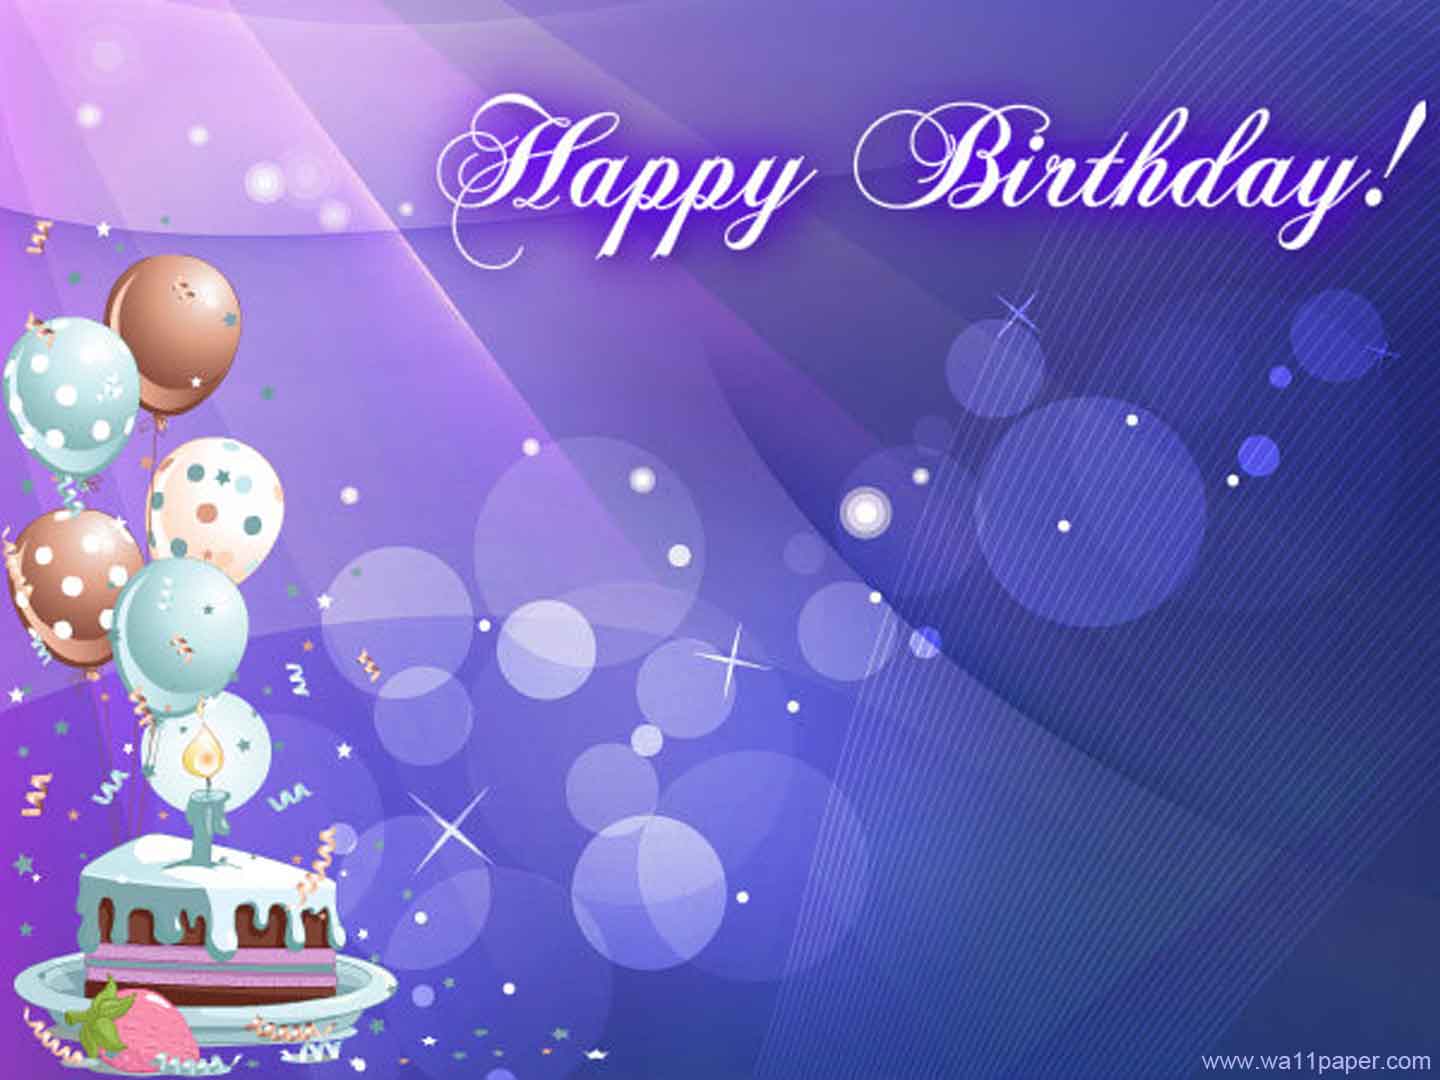 29 Birthday HD Wallpapers Backgrounds - Wallpaper Abyss